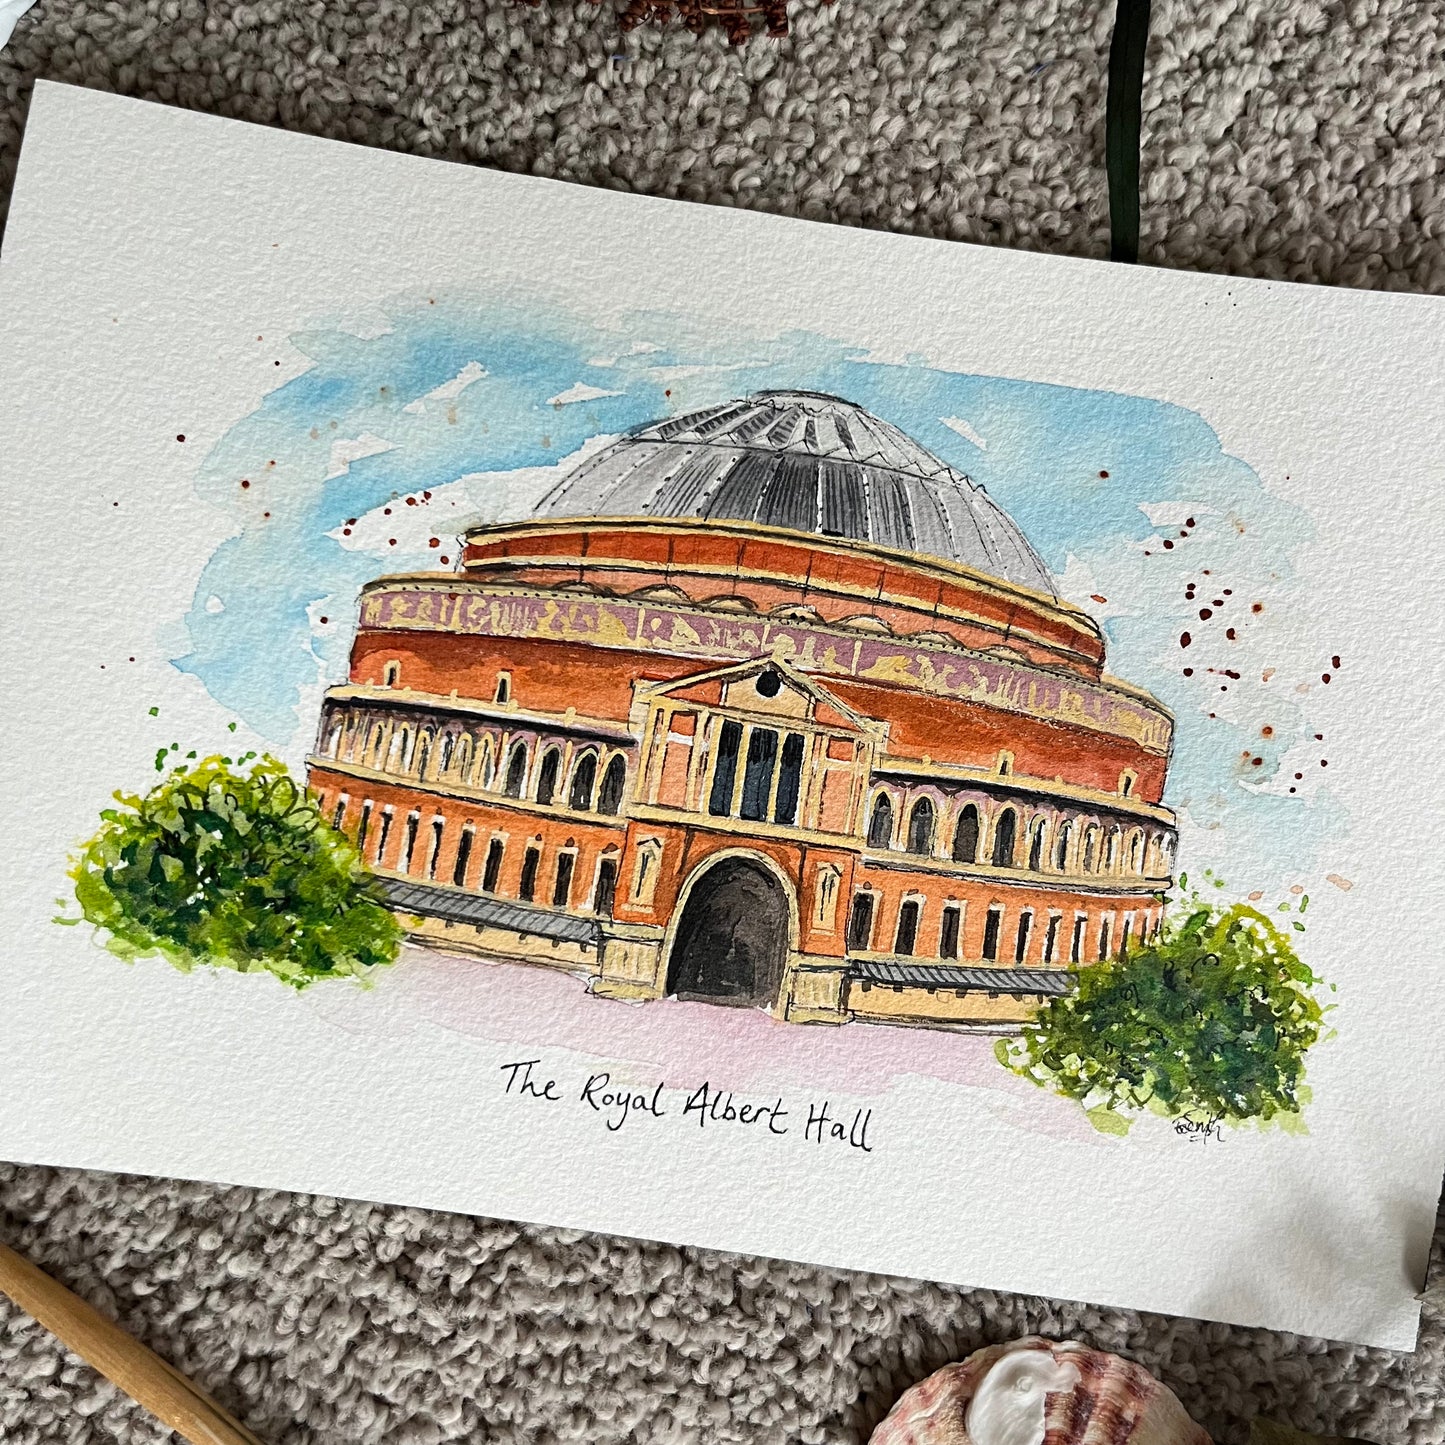 A watercolour illustration by Eve Leoni Smith of the Royal Albert Hall in London.